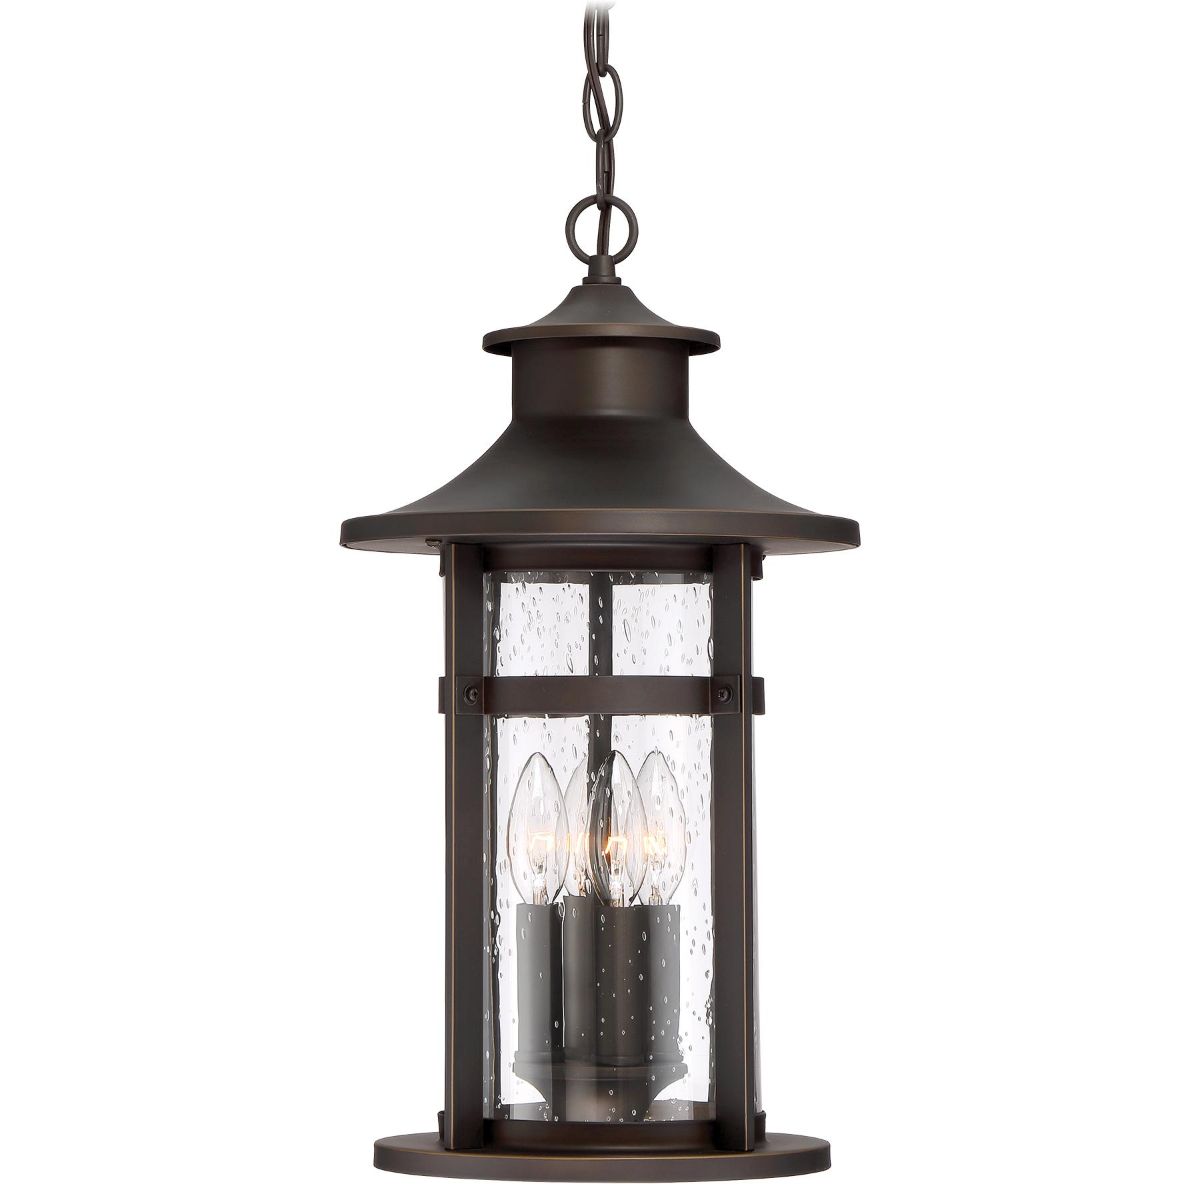 Highland Ridge 4 lights 10 in. Outdoor Hanging Lantern Oil Rubbed Bronze & Gold finish